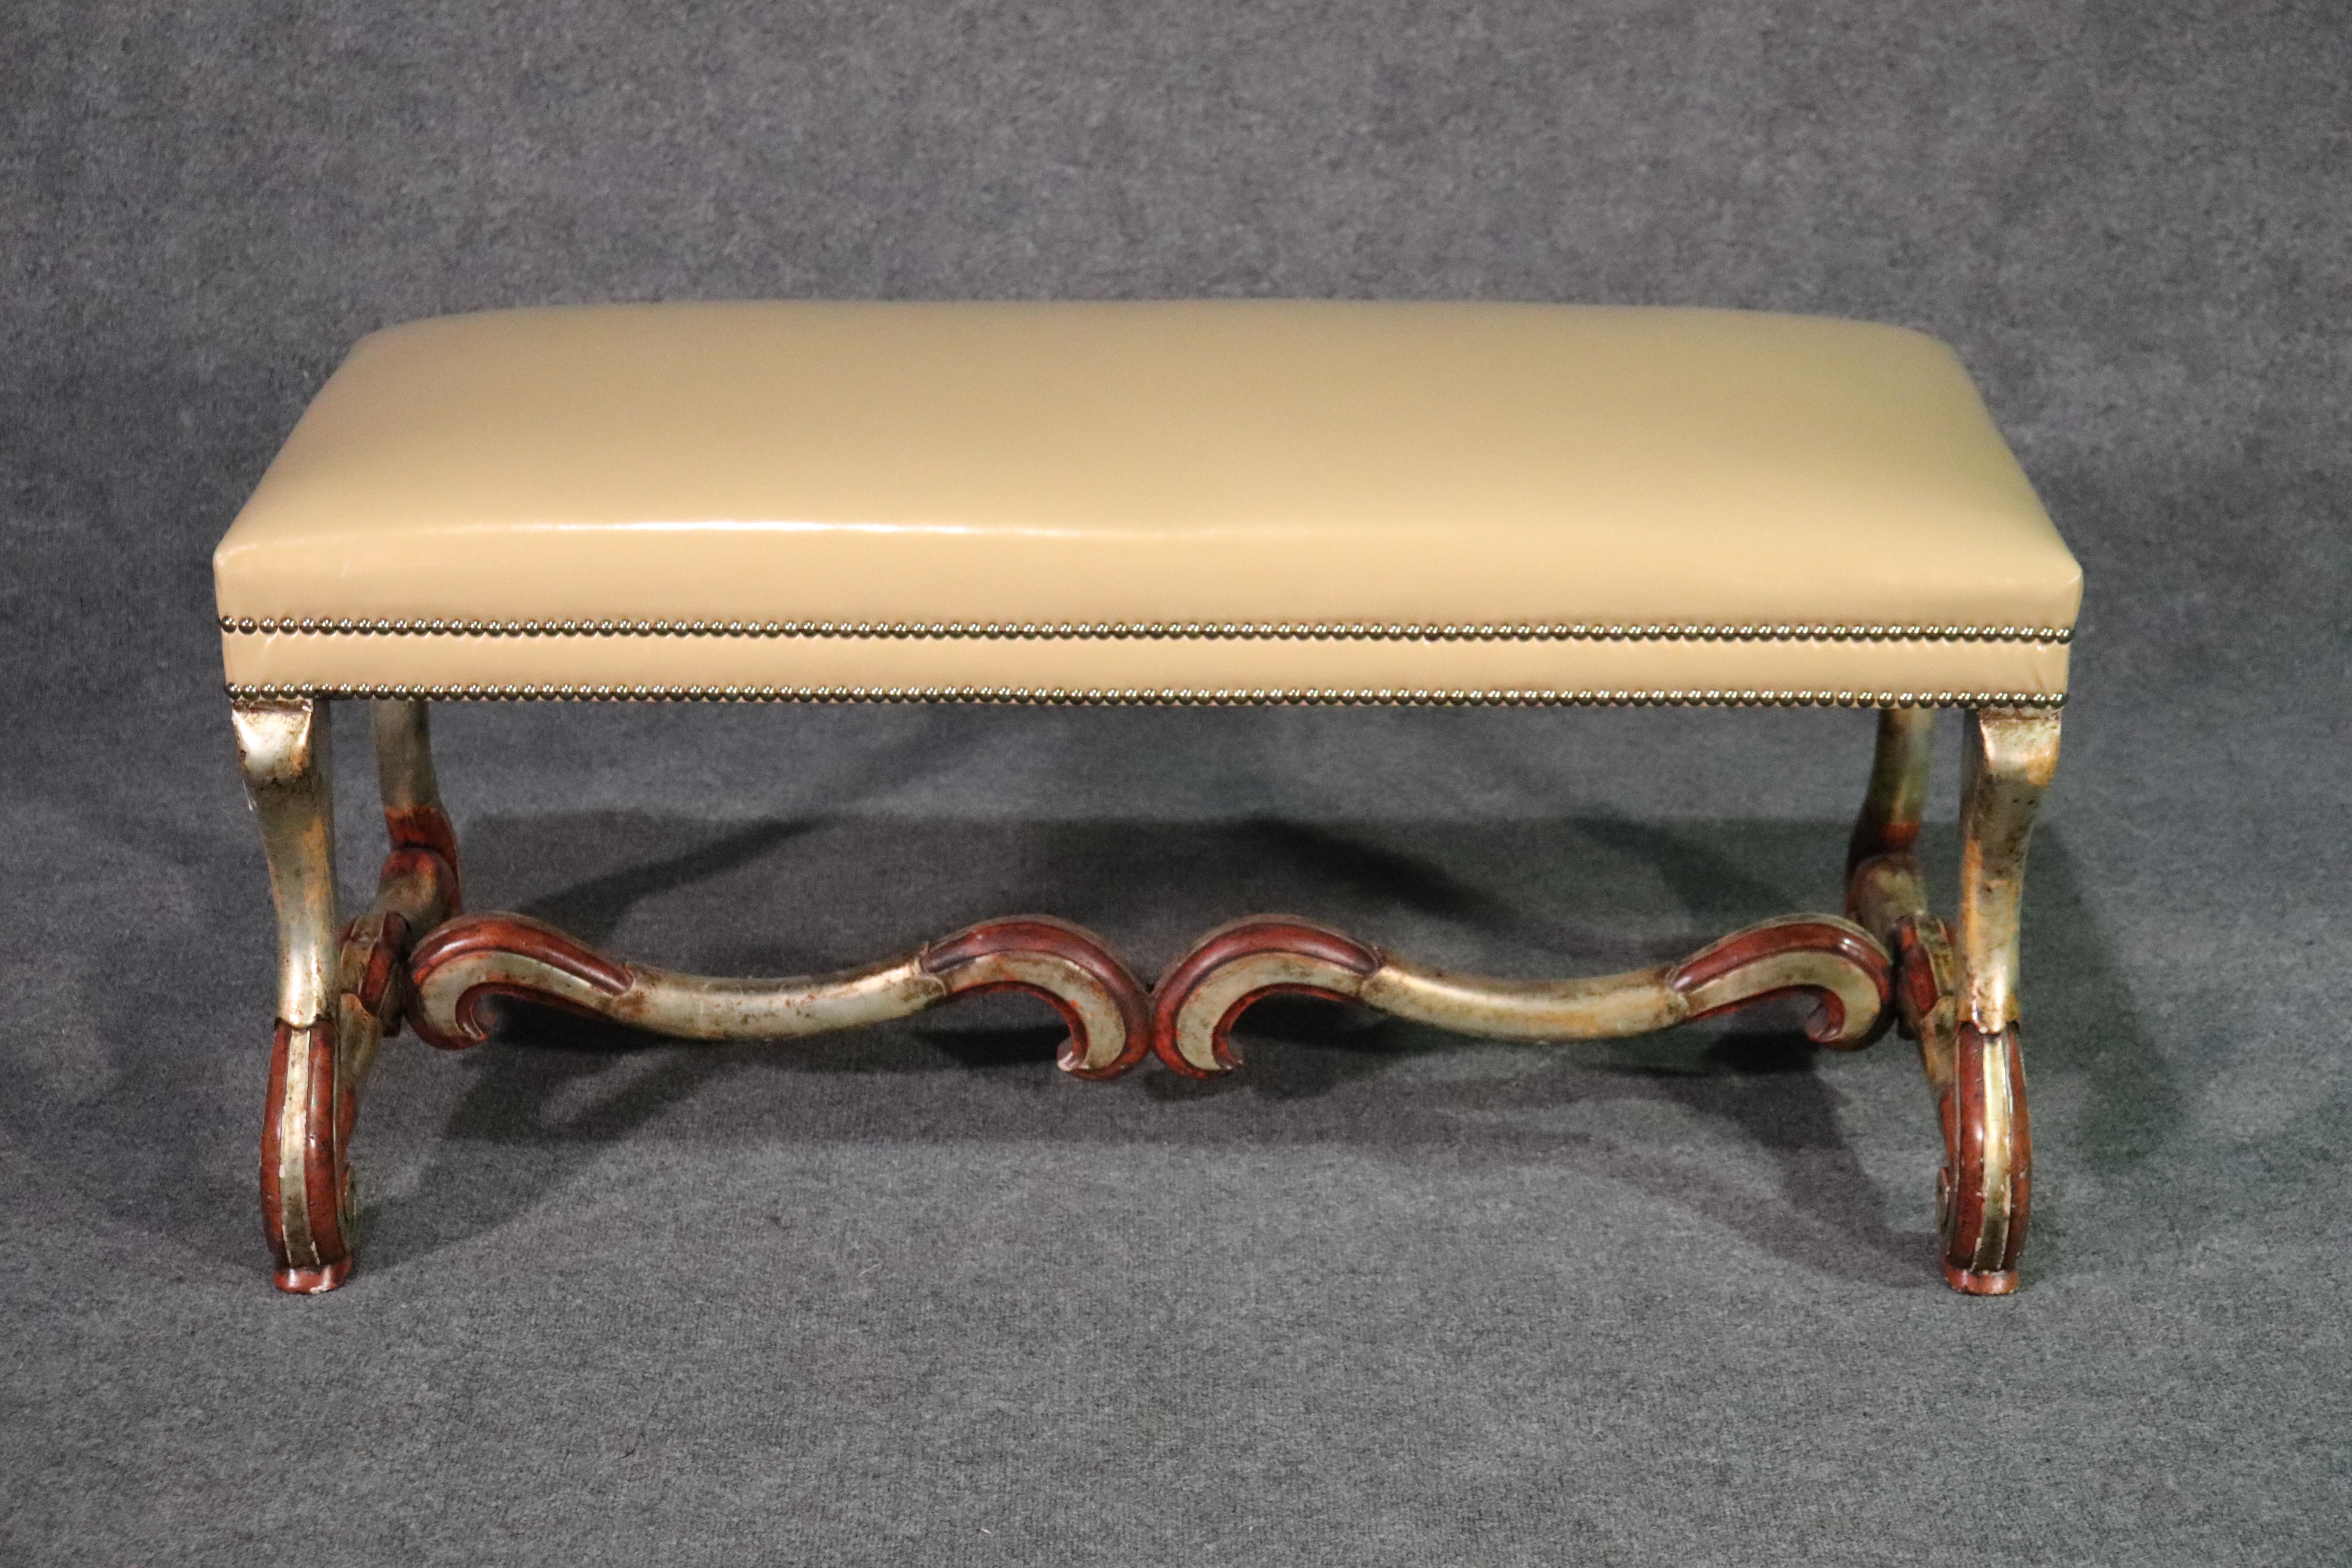 This is a beautiful window bench done in silver leaf over a red bole ground. The styling is classic French mutton legs and the upholstery is a tan patent leather or vinyl. The upholstery as well as the frame are in good condition. The piece dates to